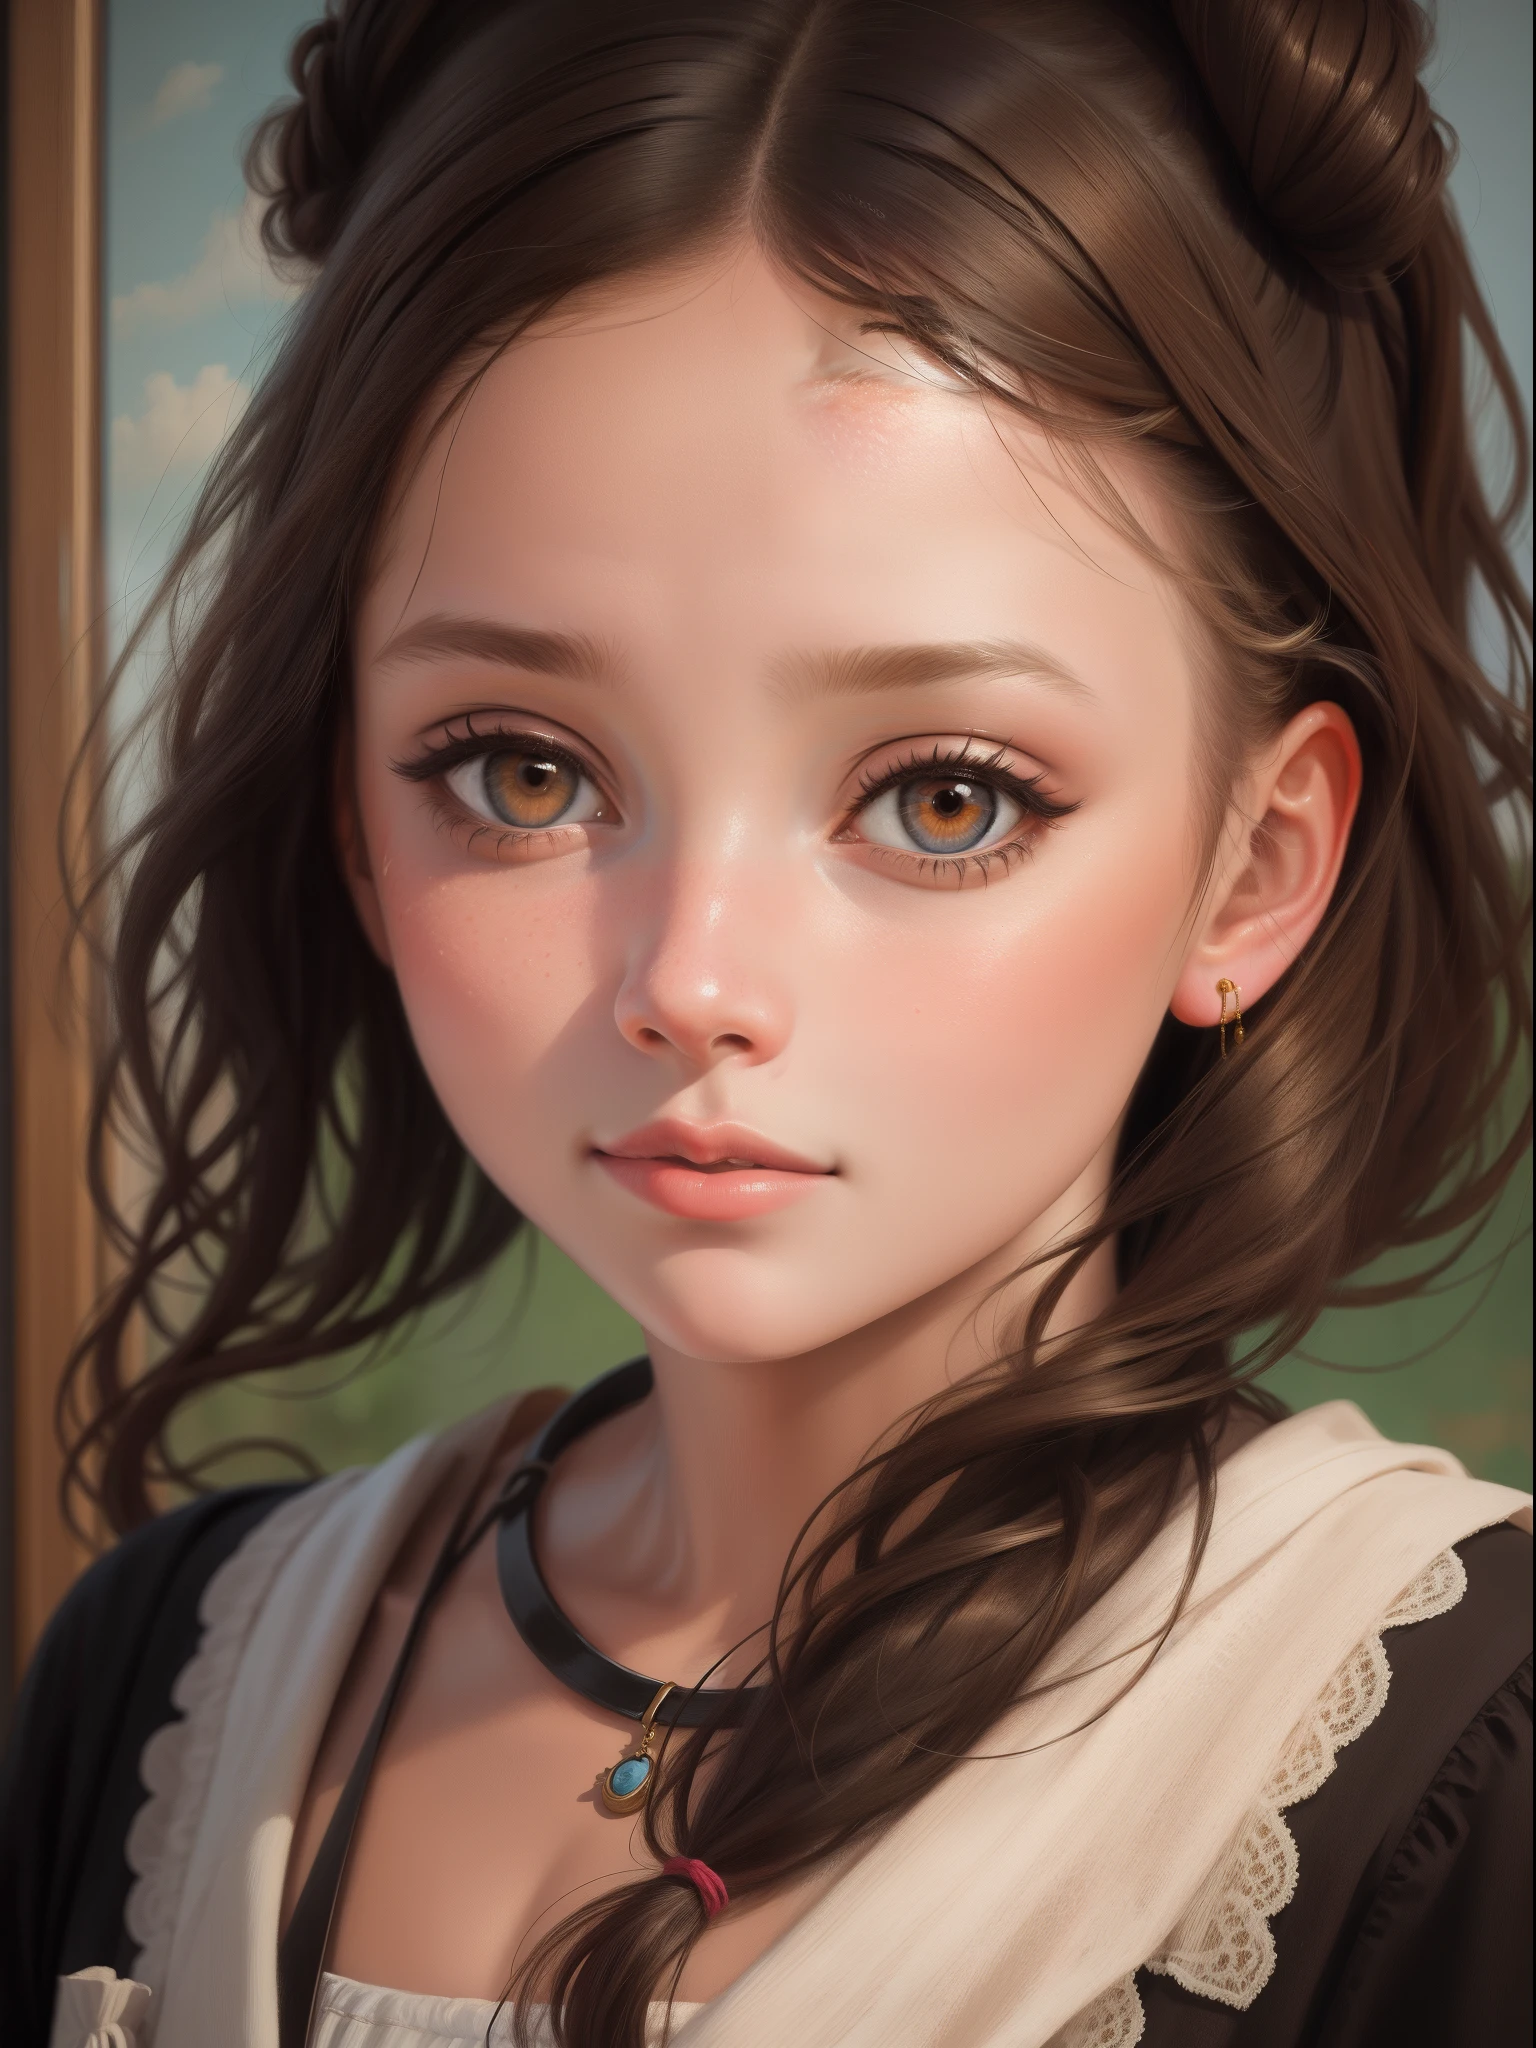 "Close-up portrait of a girl in an oil painting style."